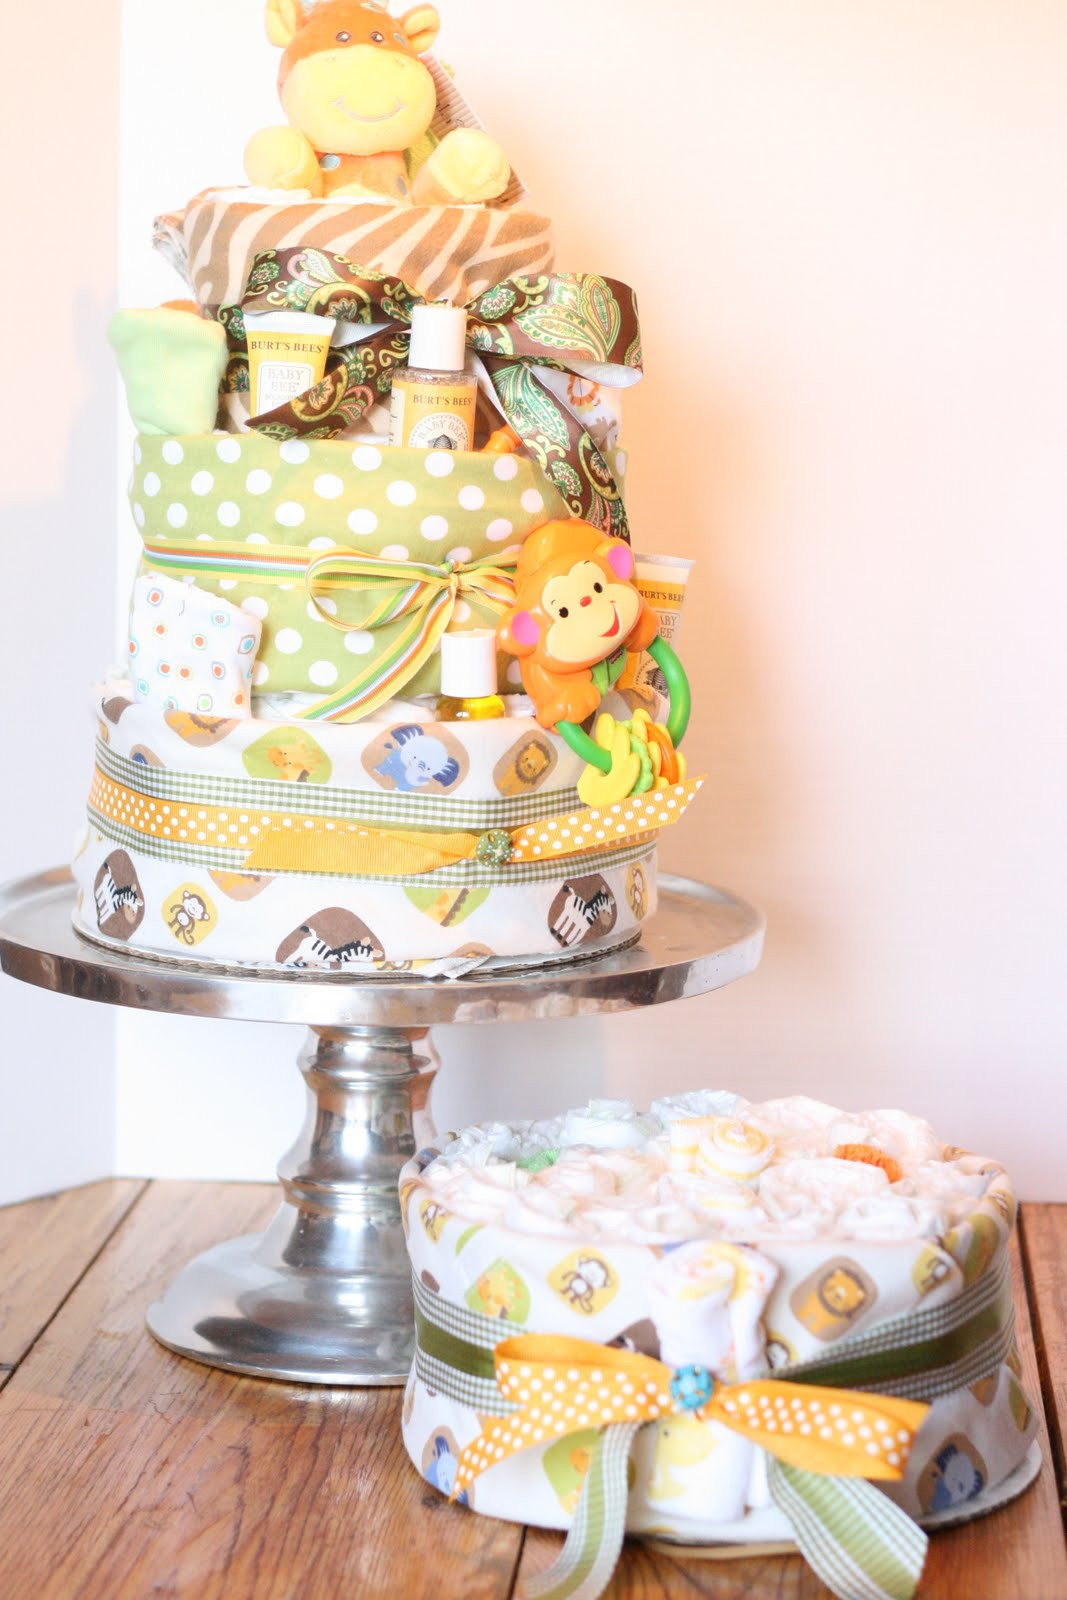 DIY Baby Shower Cake
 A Little Junk In My Trunk How to Make a Diaper Cake